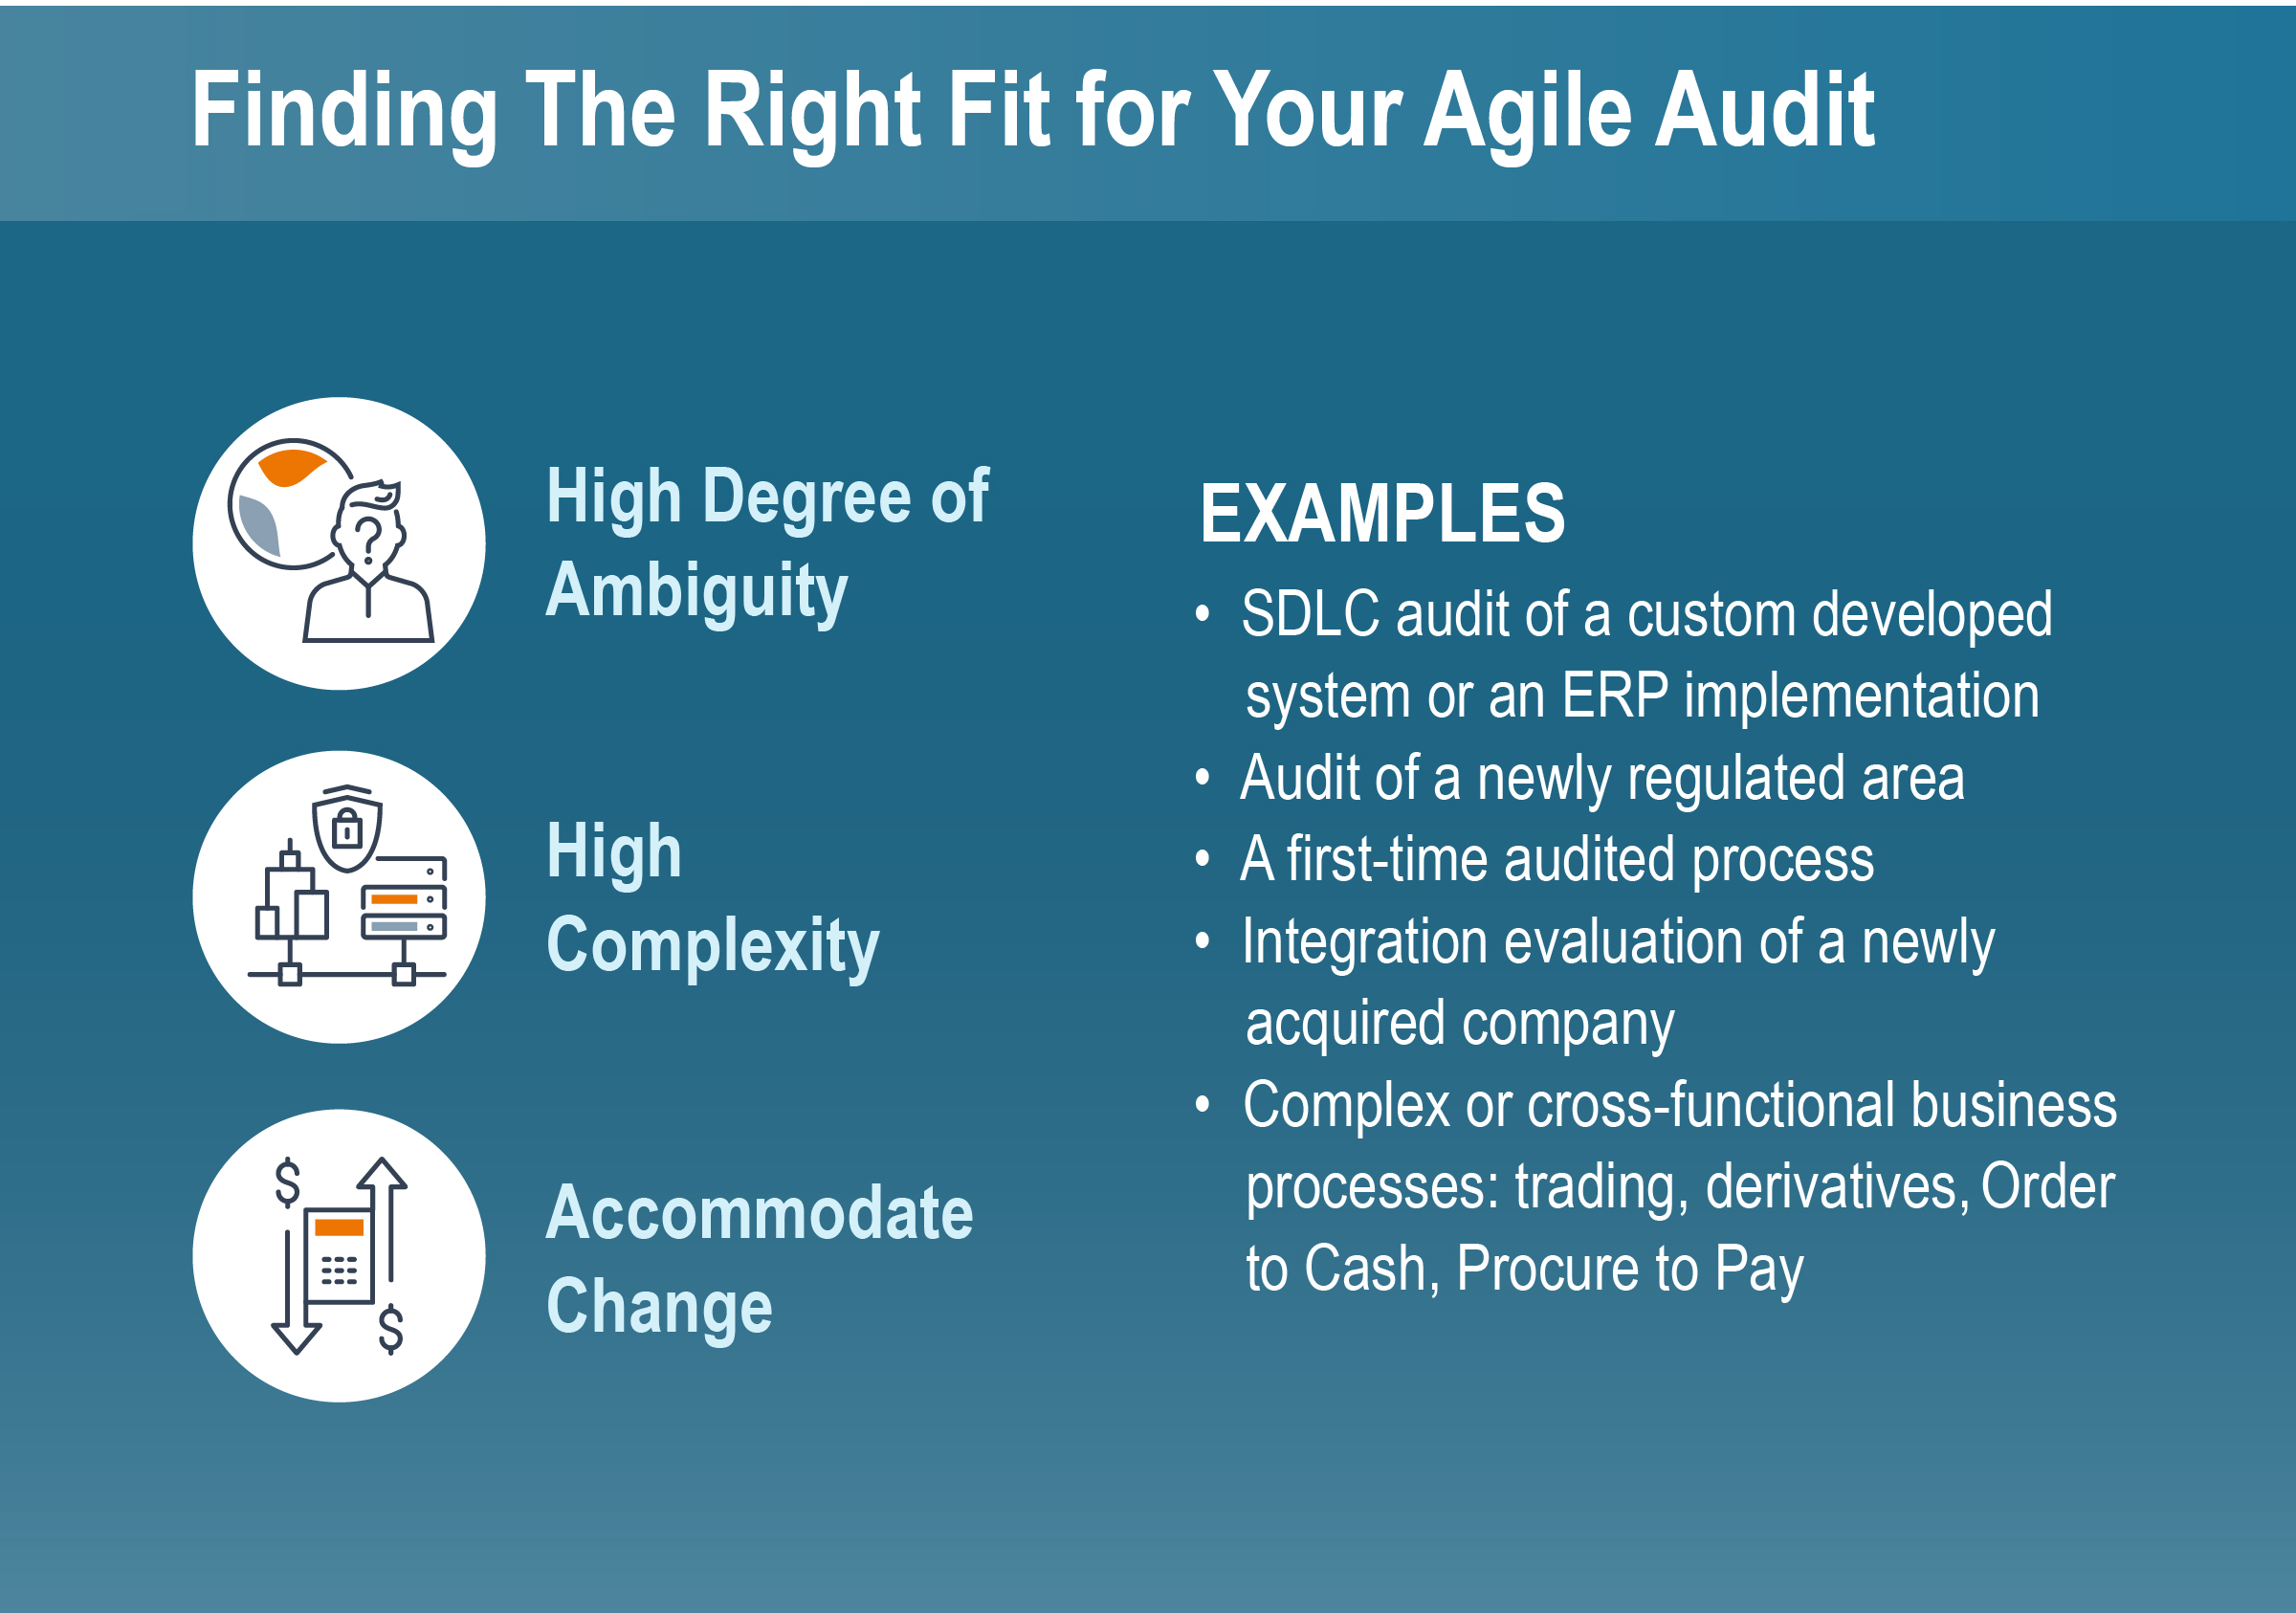 agile auditing roles and teams